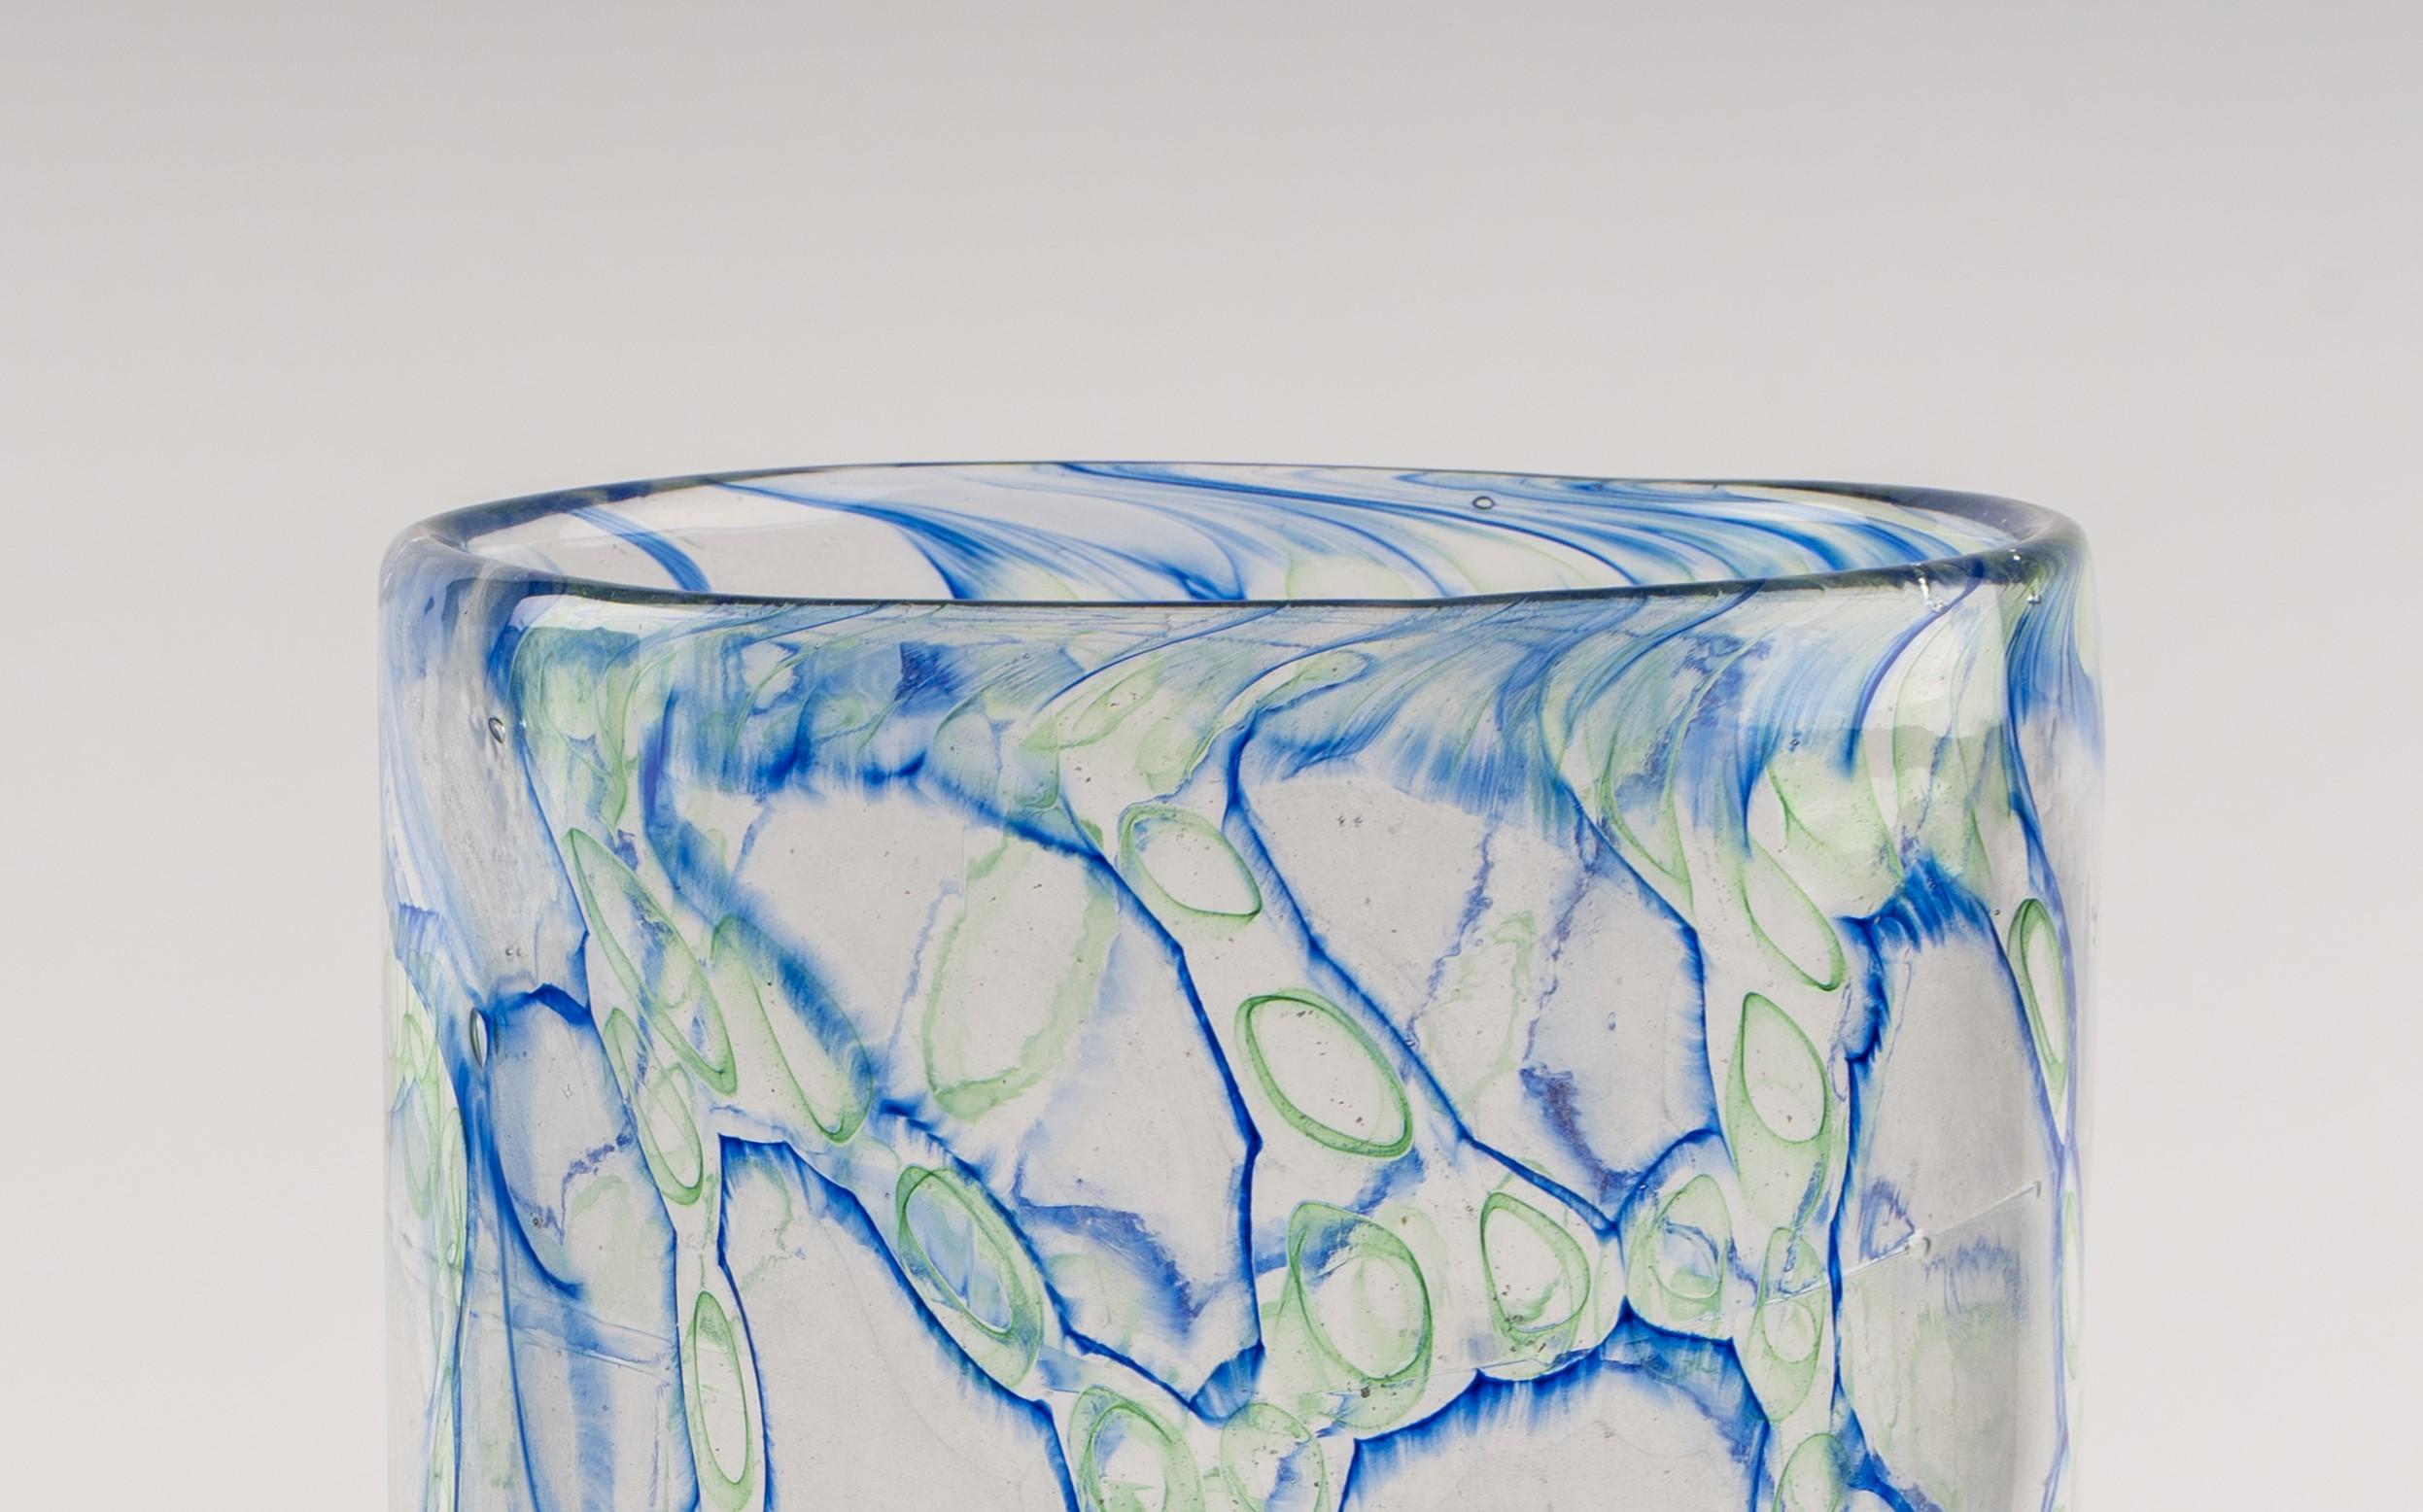 Jeremiah Jacobs, a masterful glassblower, has created an exquisite blown glass piece that incorporates the captivating murrini technique. This stunning artwork features a coral-like pattern formed by blue and green lines on clear glass, showcasing